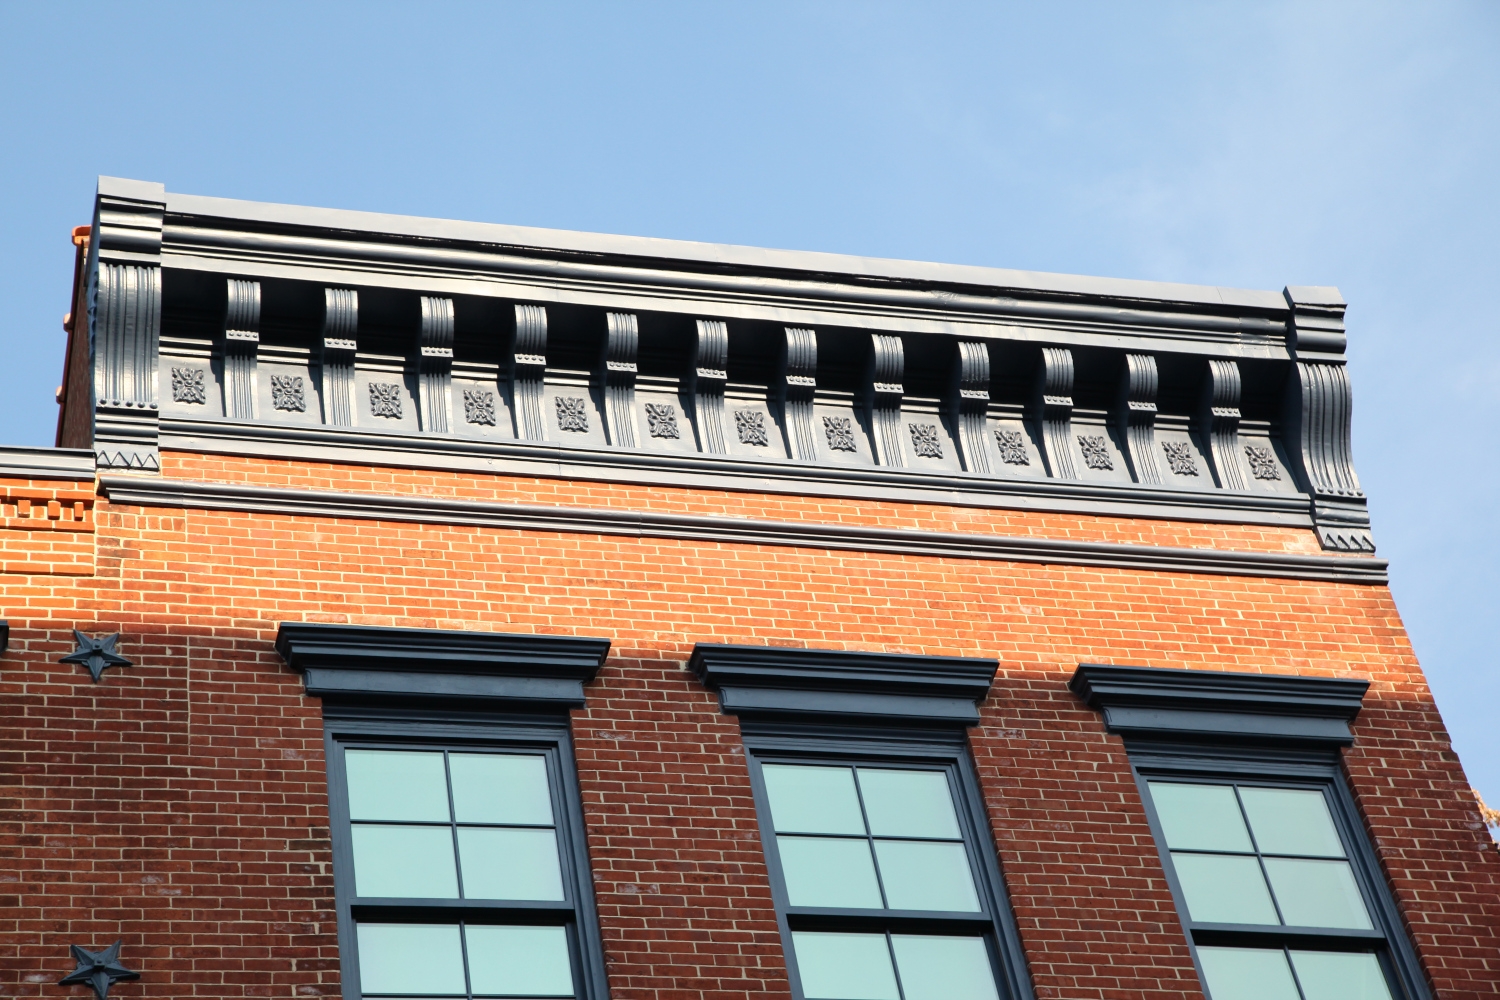 Top level view of a New York City building showcasing Jepol Construction's high-quality craftsmanship in exterior renovation, including cornice replacement, brickwork, and ornamental window lintel restoration.